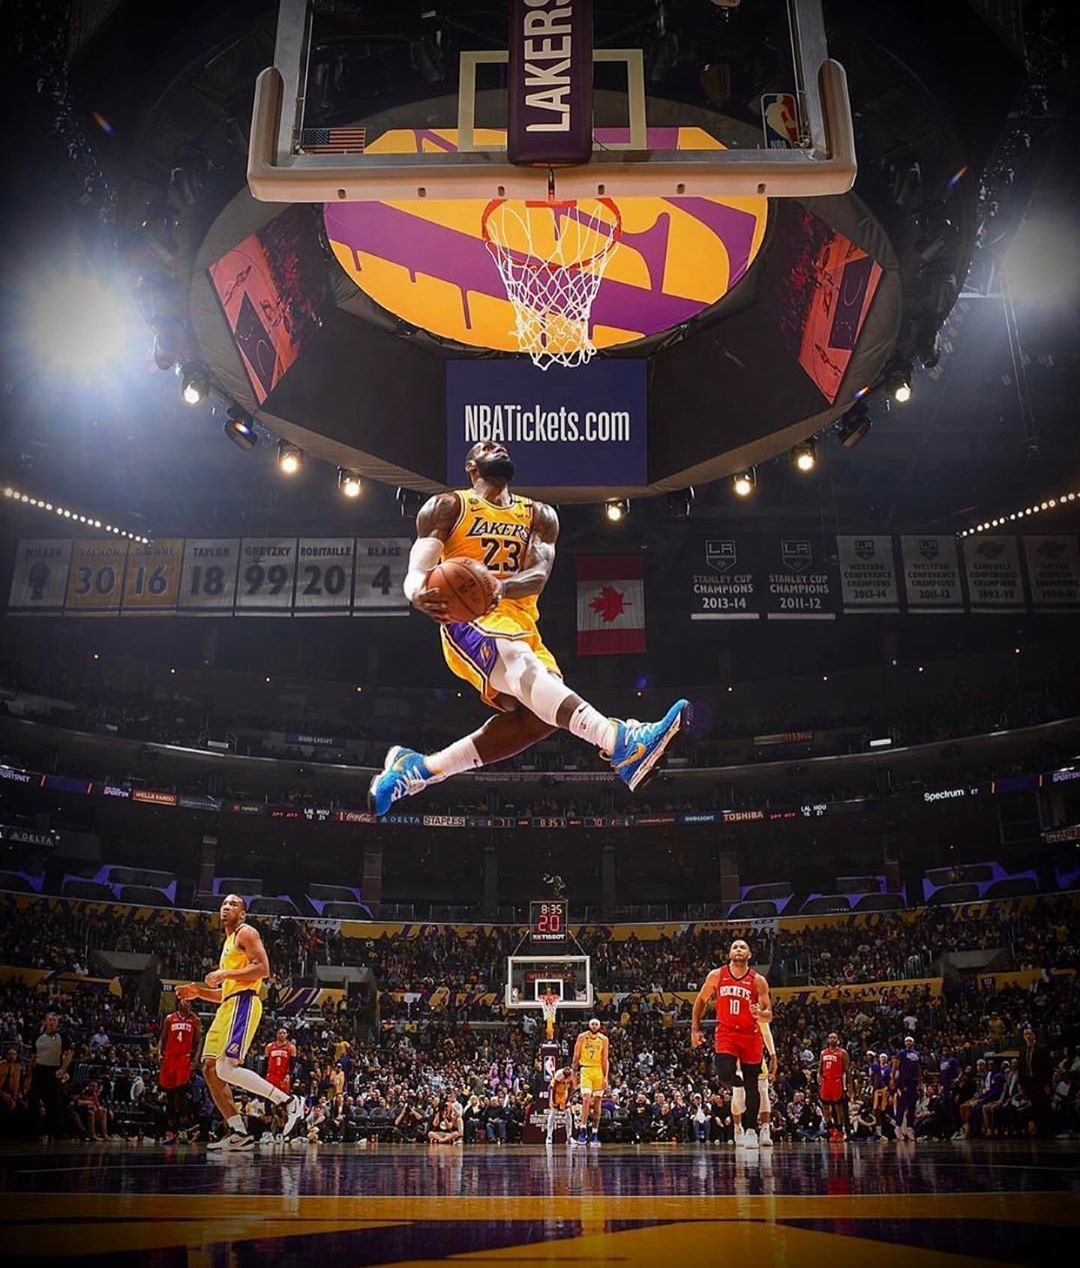 LeBron James is in the air with the ball in his hands. - Lebron James